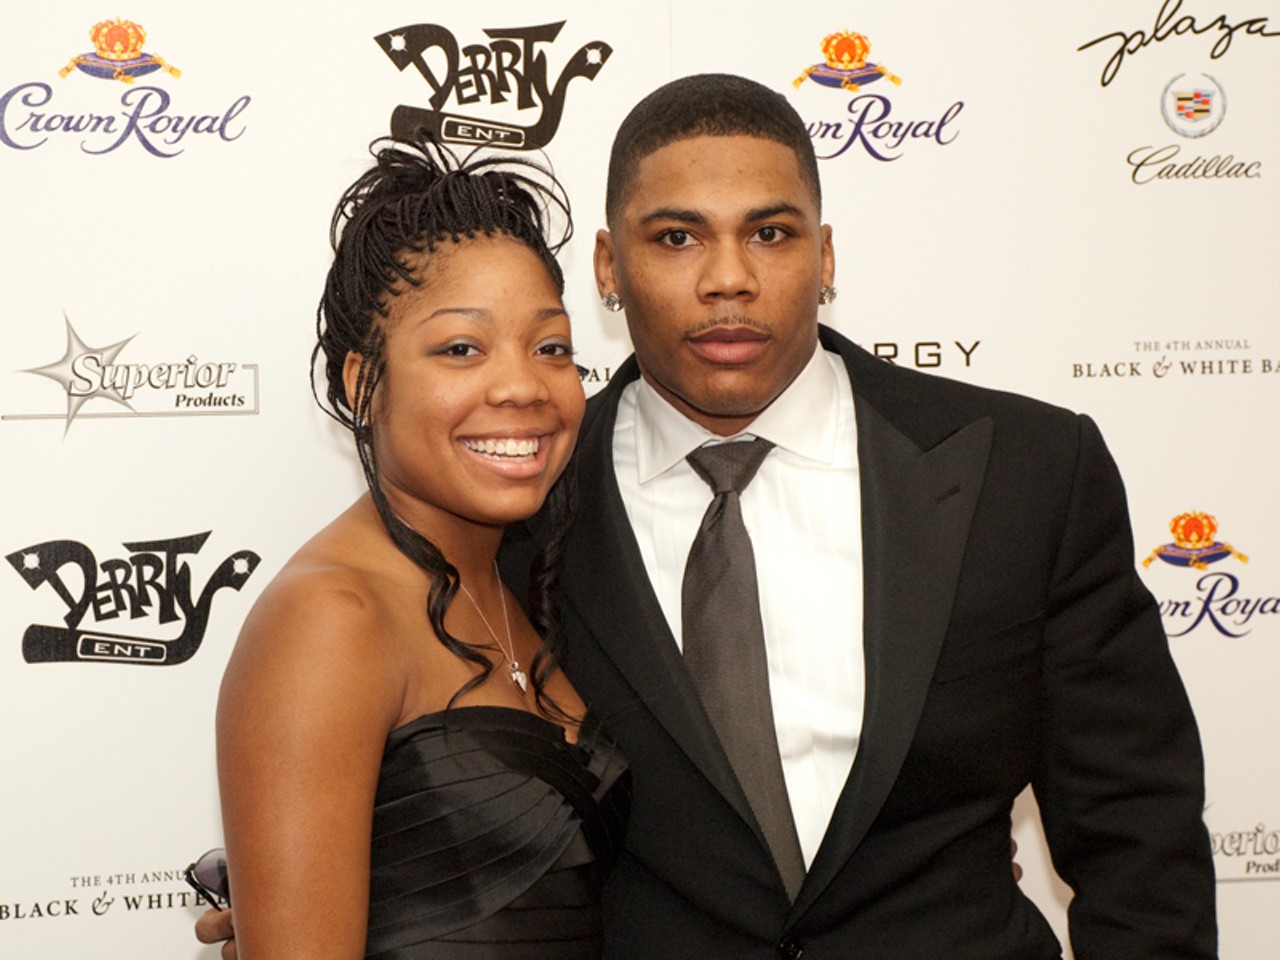 Nelly's Black & White Ball at the Chase Park Plaza, 12/6/09